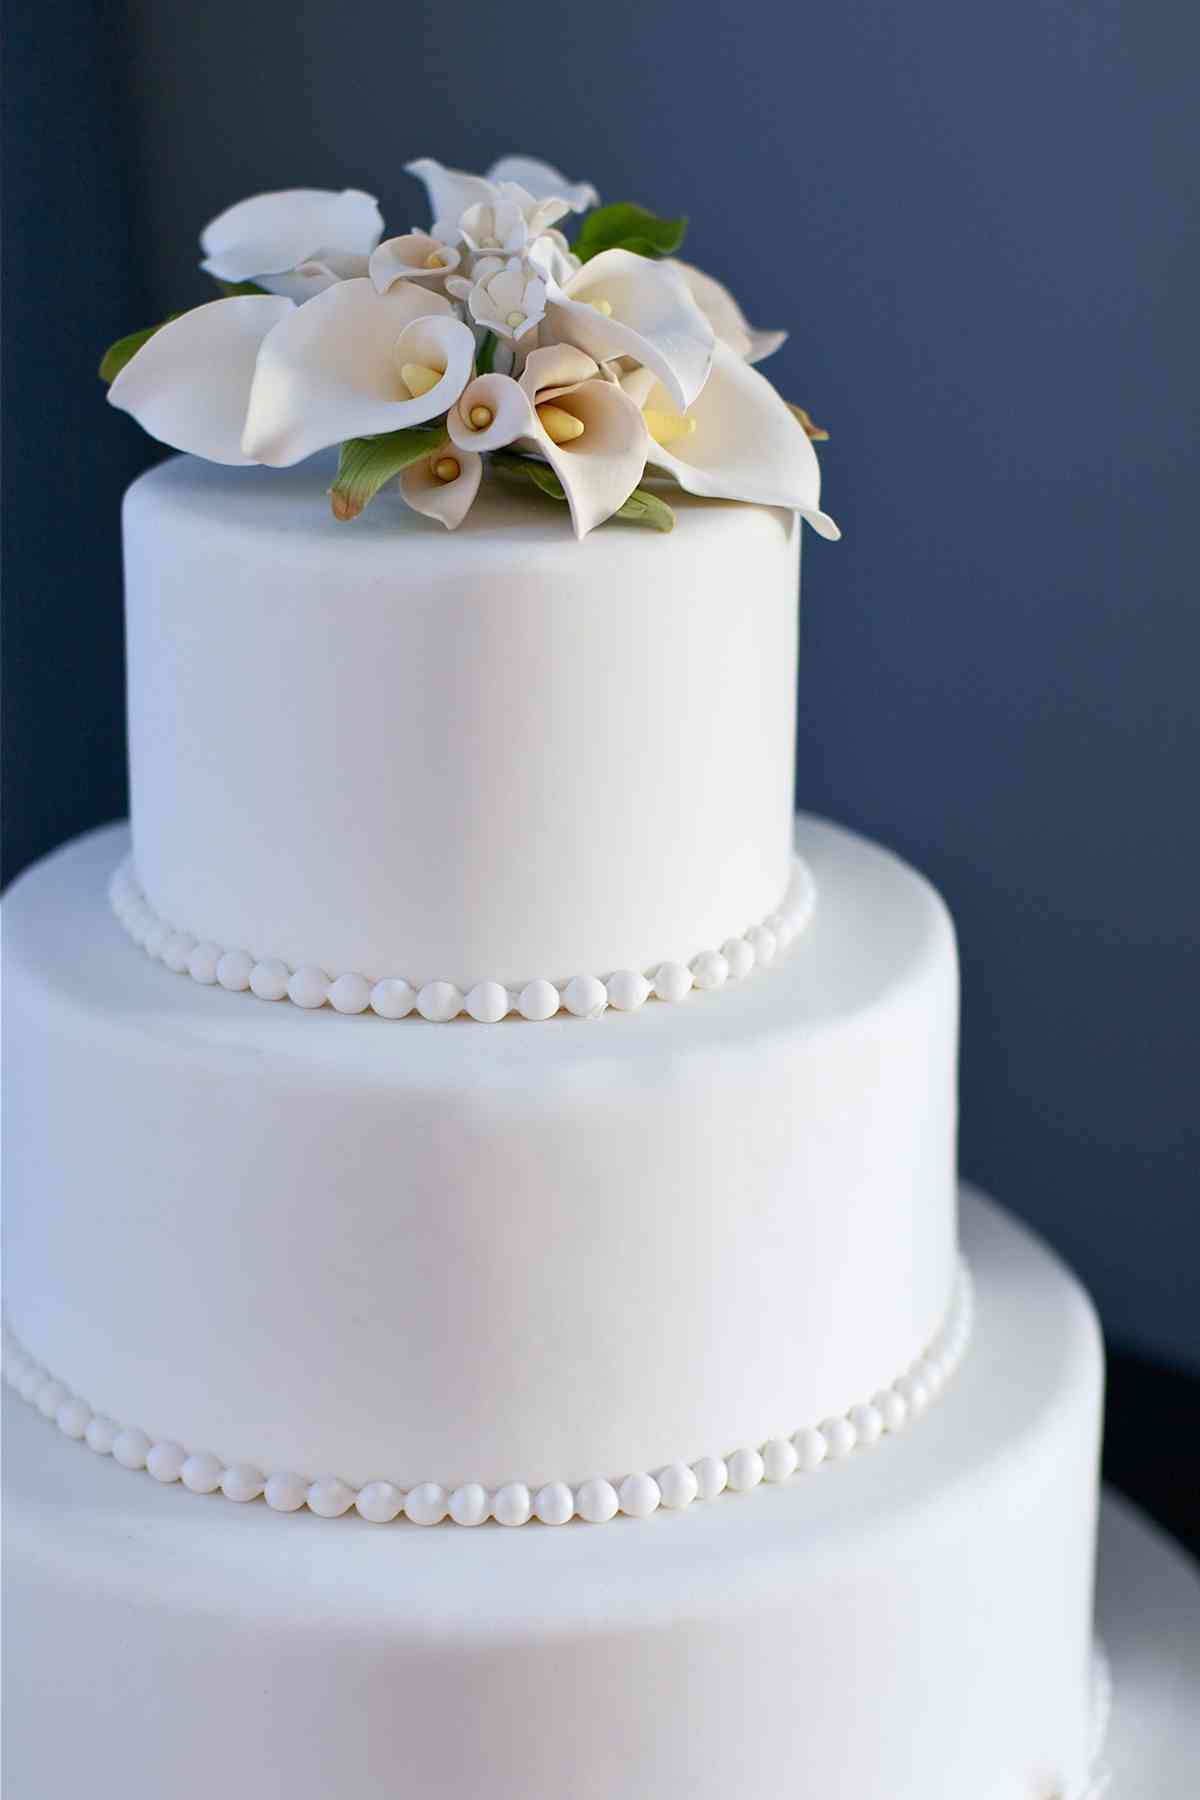 Which Wedding Cake Style Should I Choose?